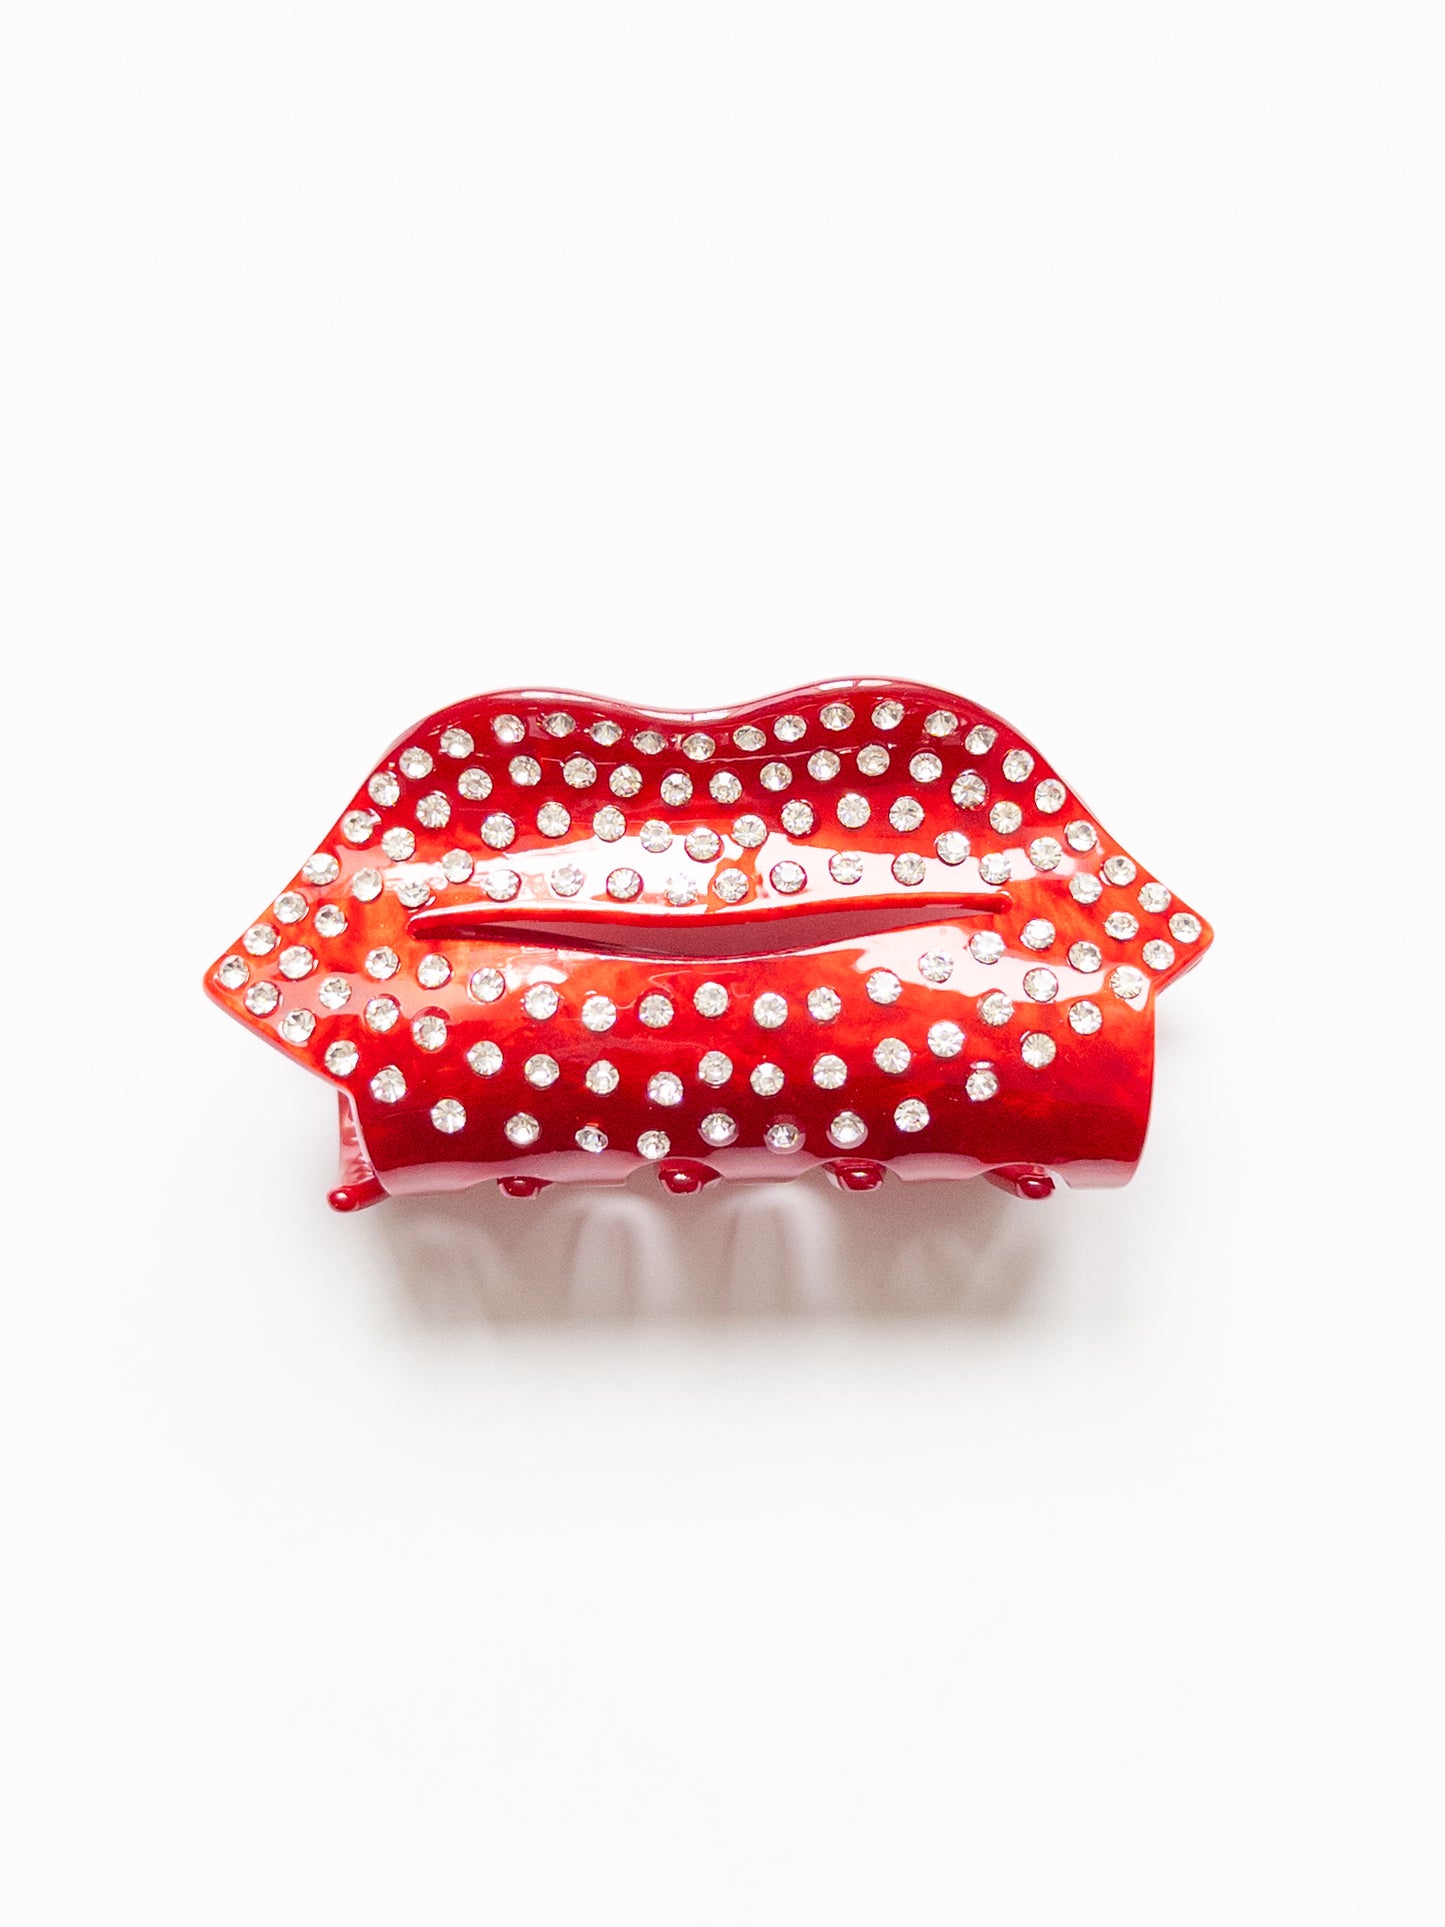 Sweet and sassy kiss lips hair claw clip in a stunning, rich red and adorned with sparkly stones! The perfect size claw clip for half up hairstyles.